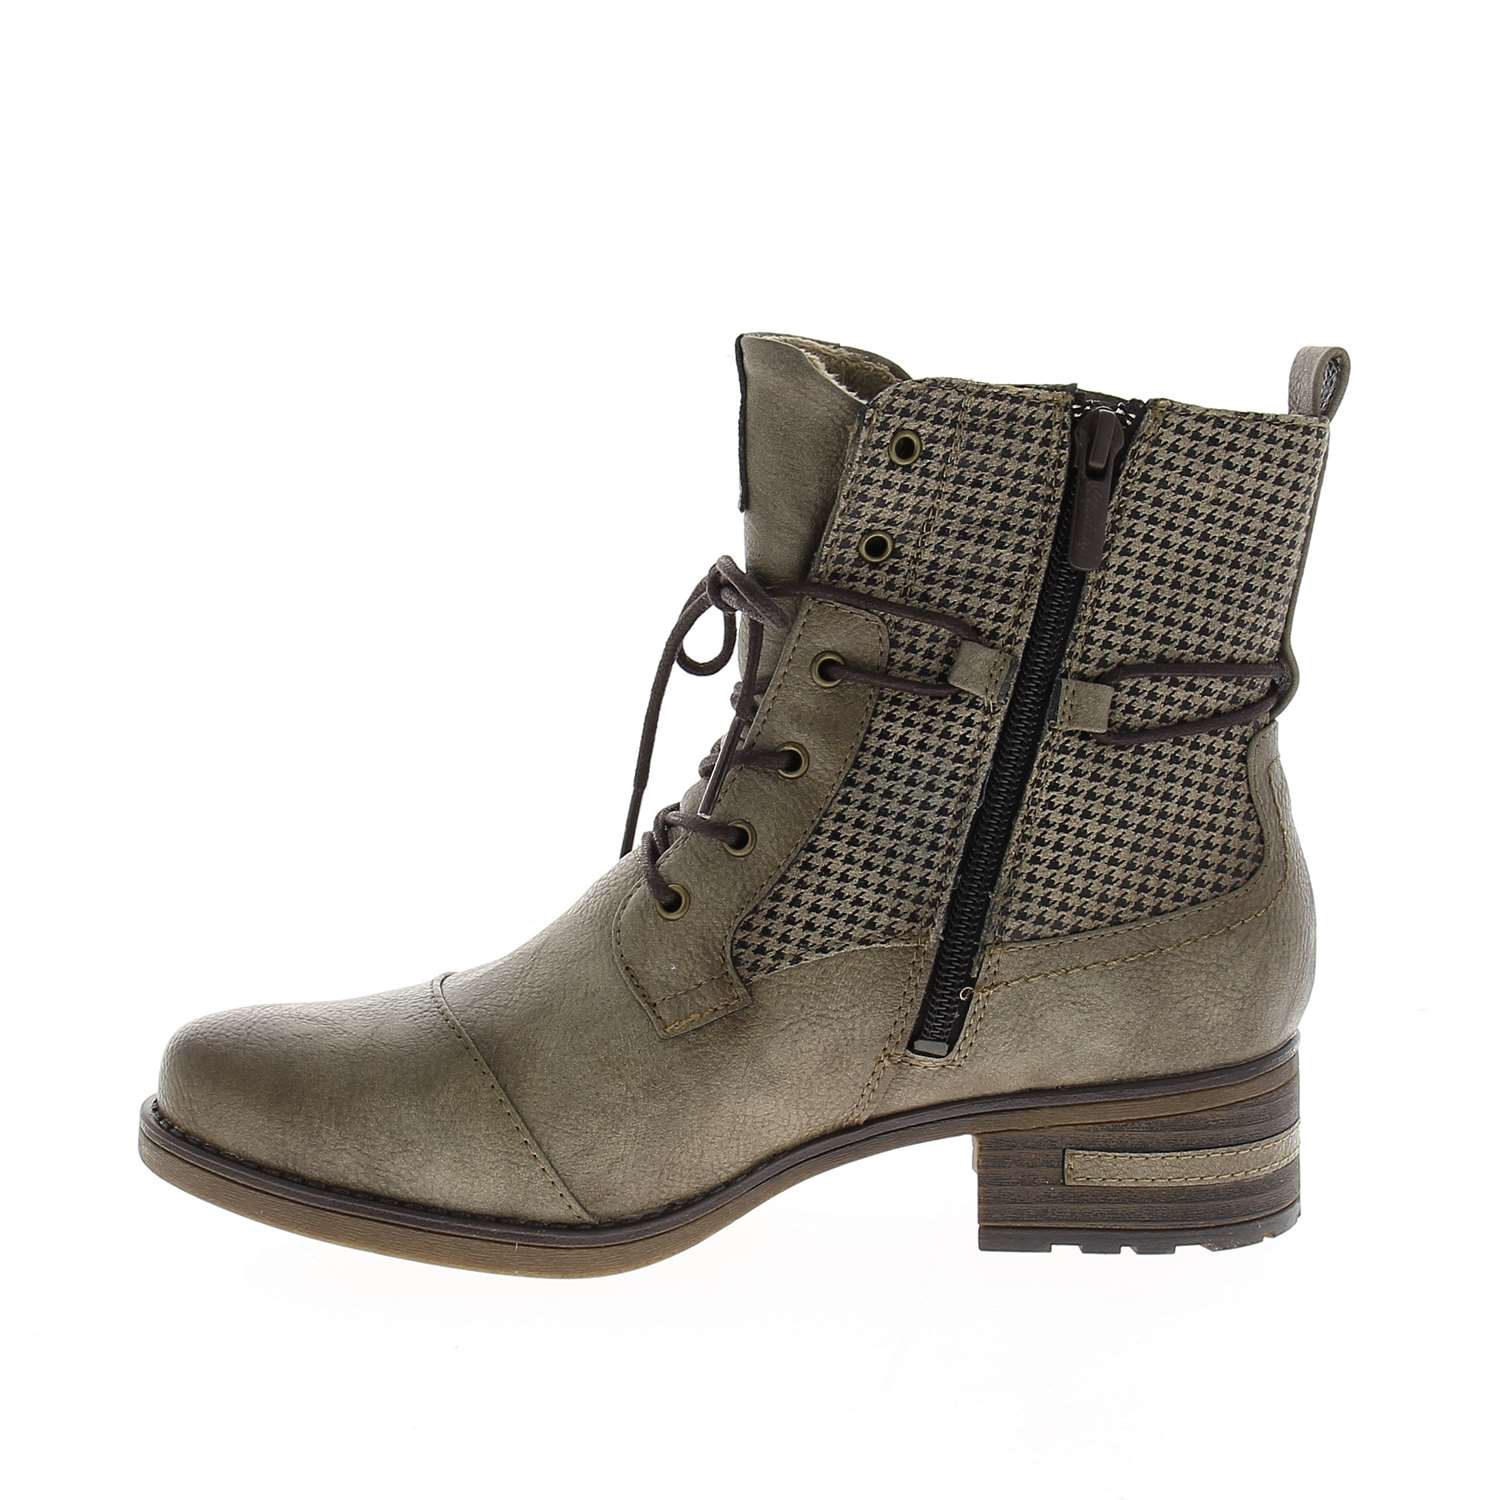 05 - MUKKO - MUSTANG - Boots et bottines - Synthétique